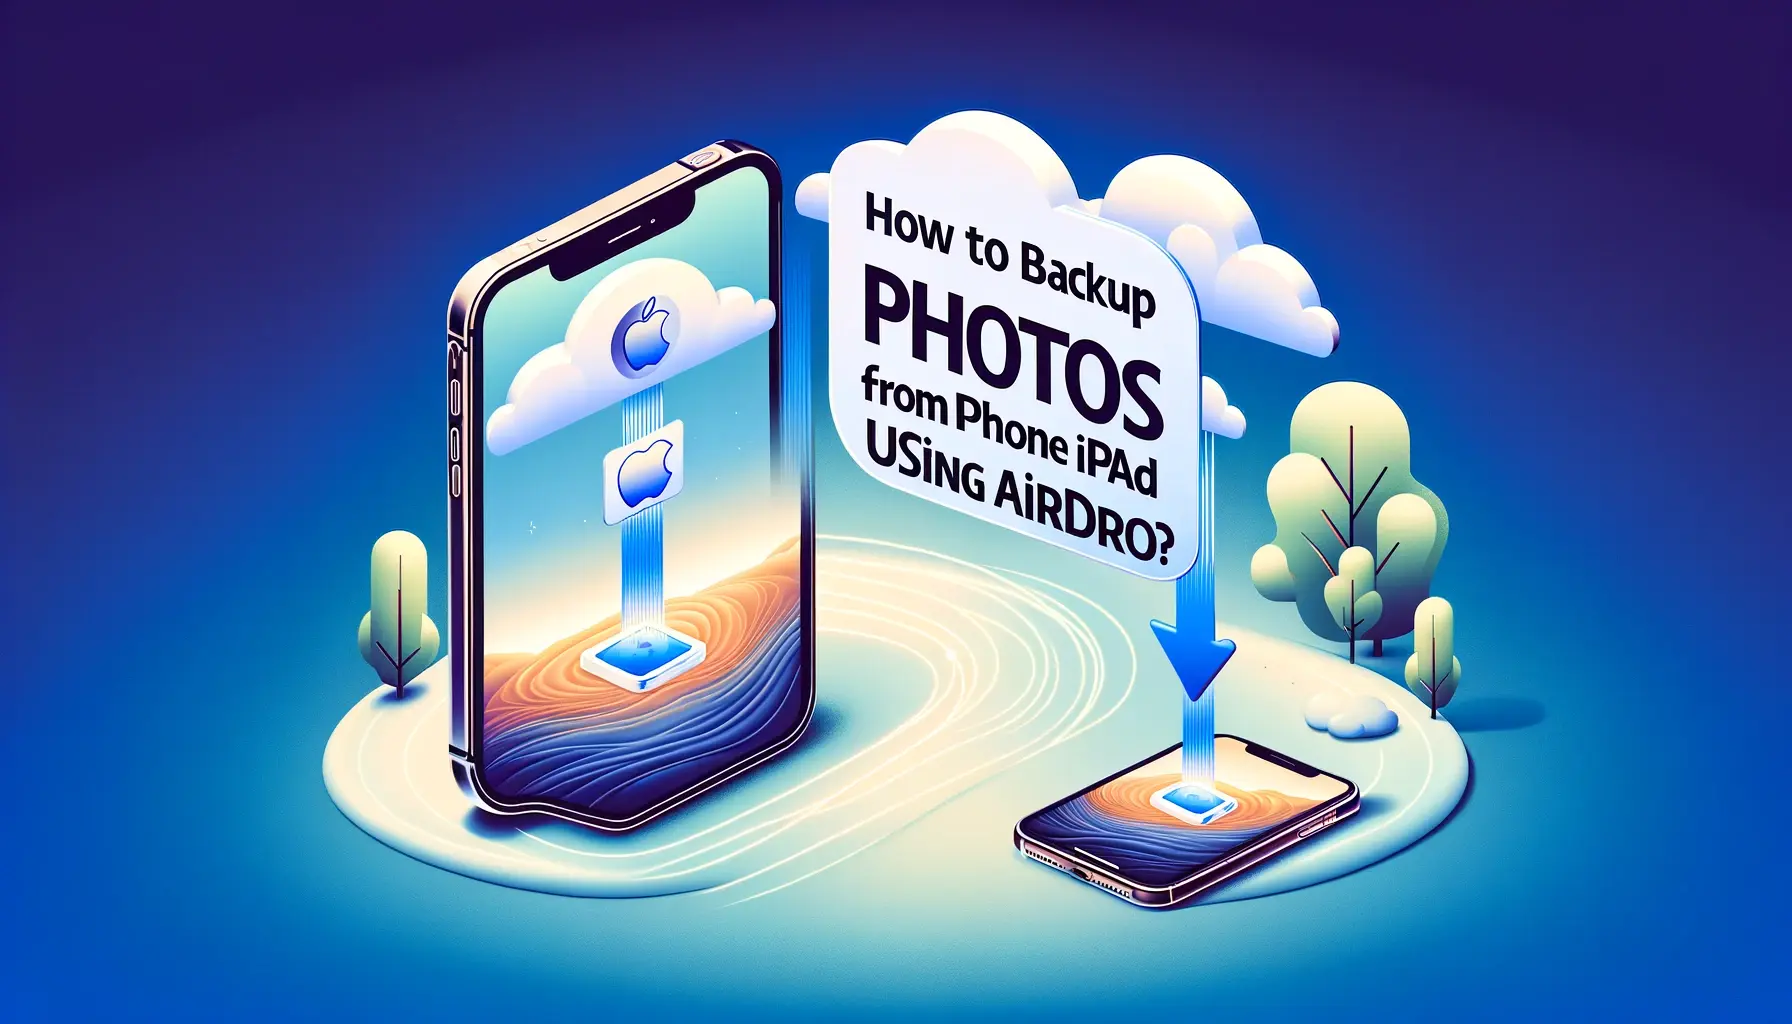 How to Backup Photos from iPhone to iPad using AirDrop?